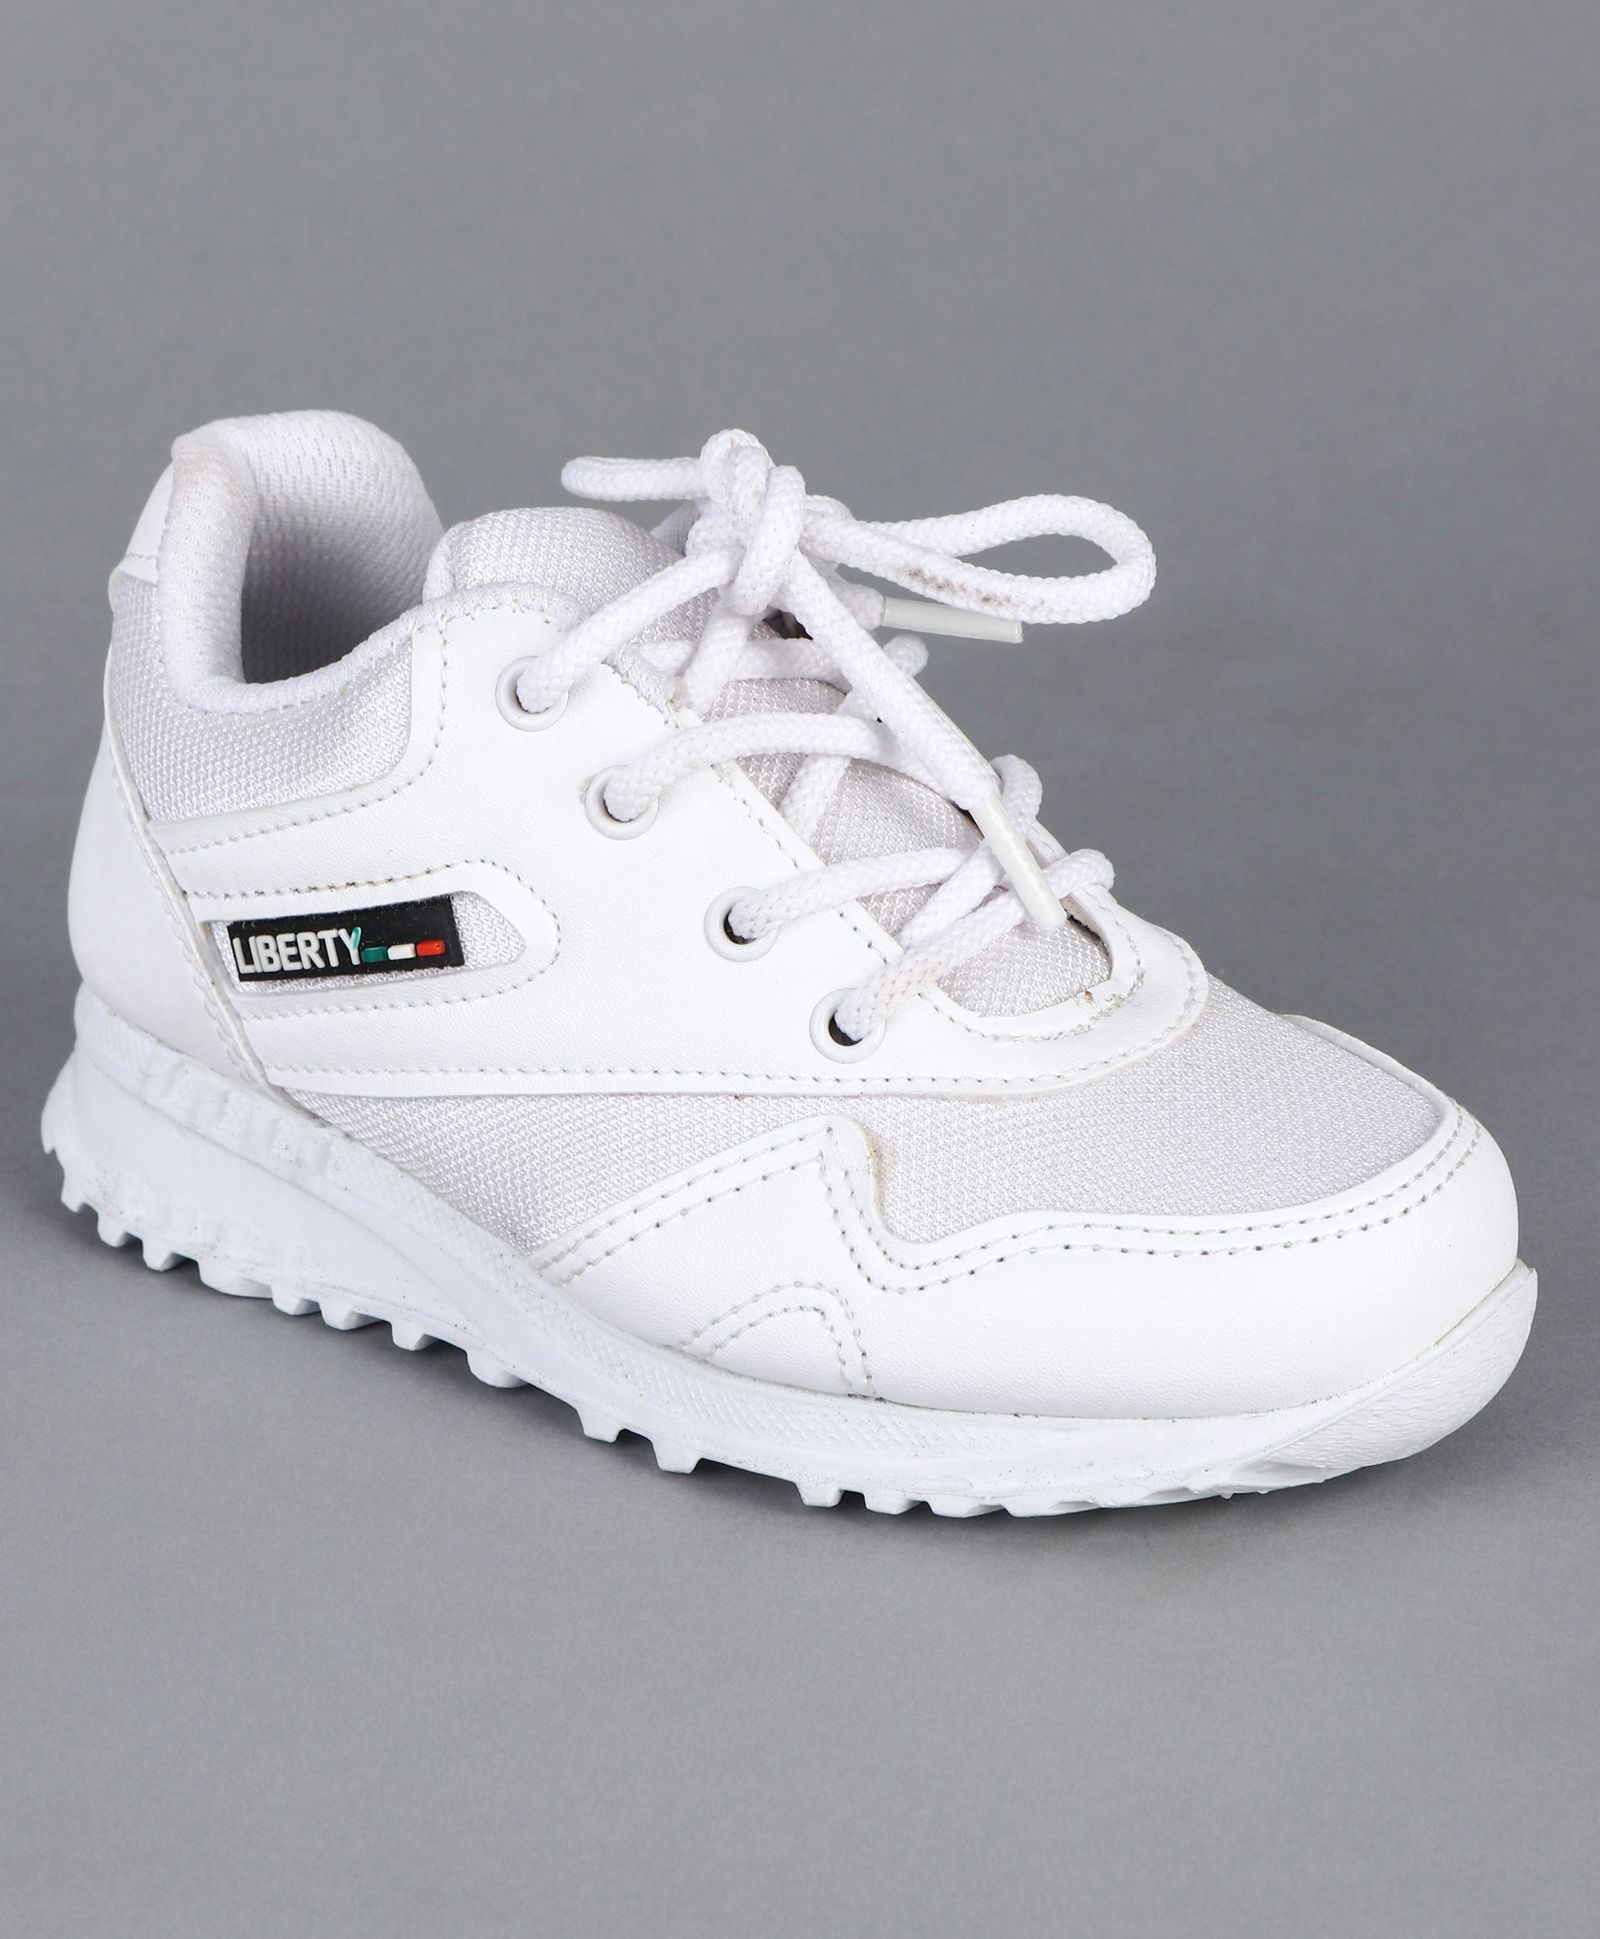 liberty force 10 school shoes white